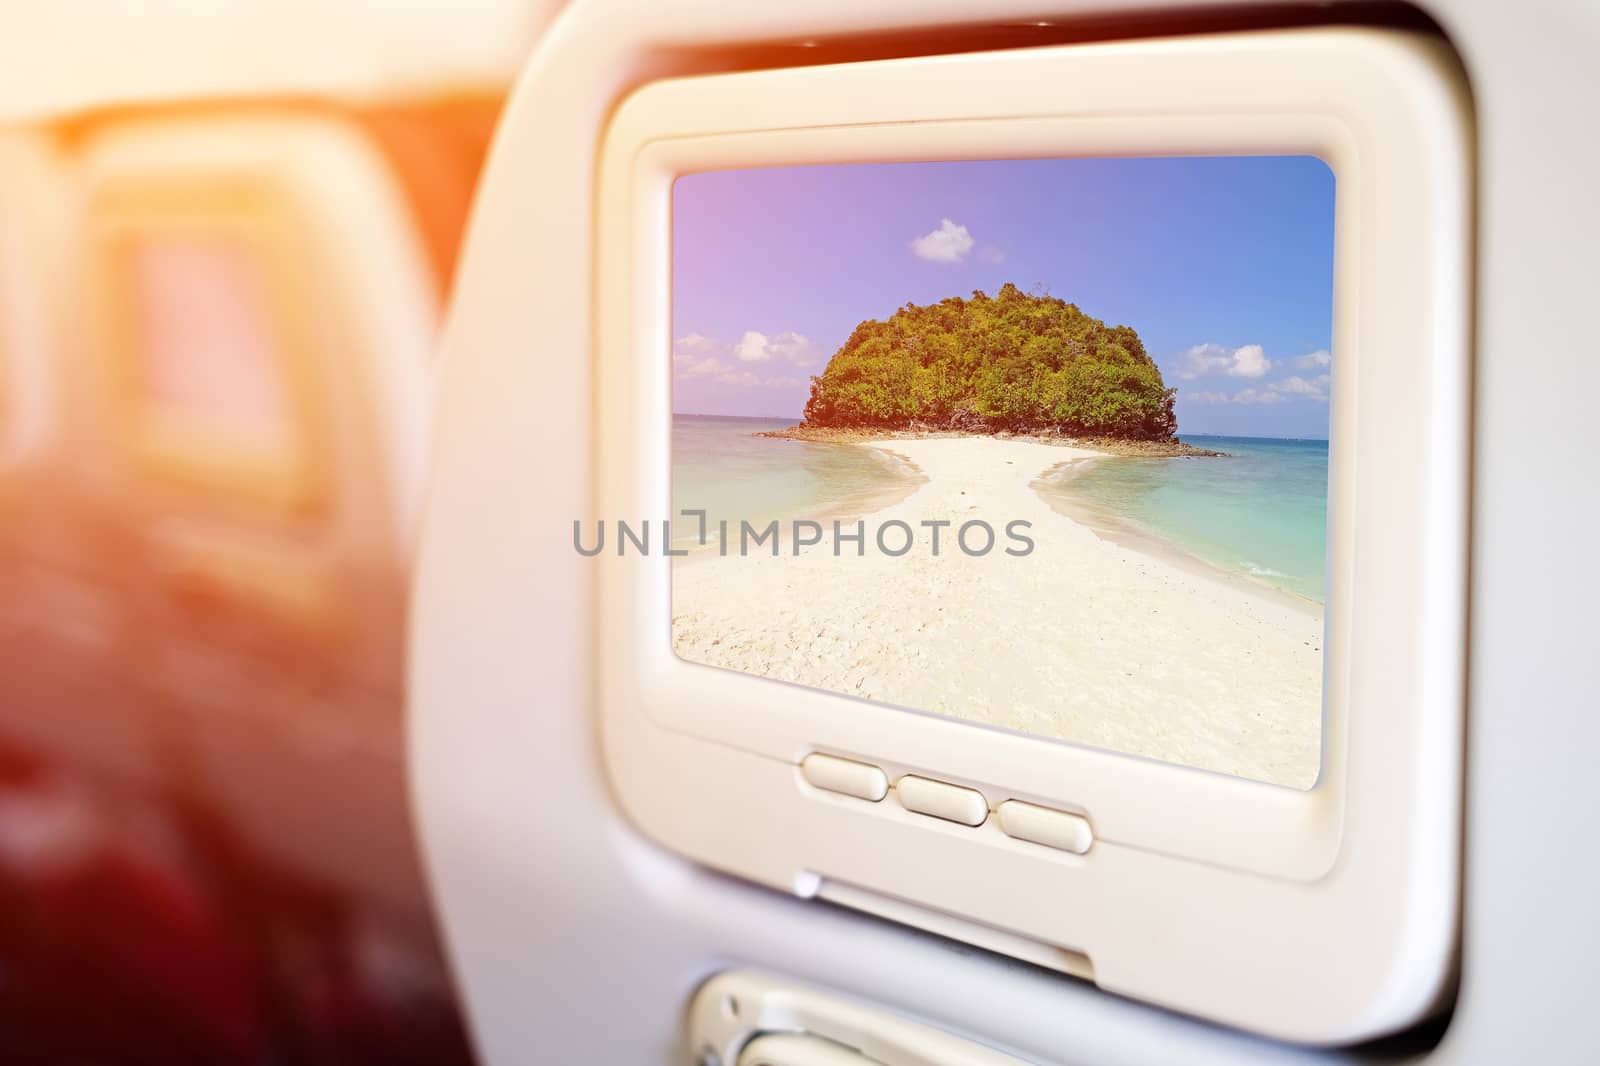 Aircraft monitor in front of passenger seat showing Miracle beach & crystal clear water at Koh Kai, Koh Tub & Koh Mor, Krabi, Thaiand.